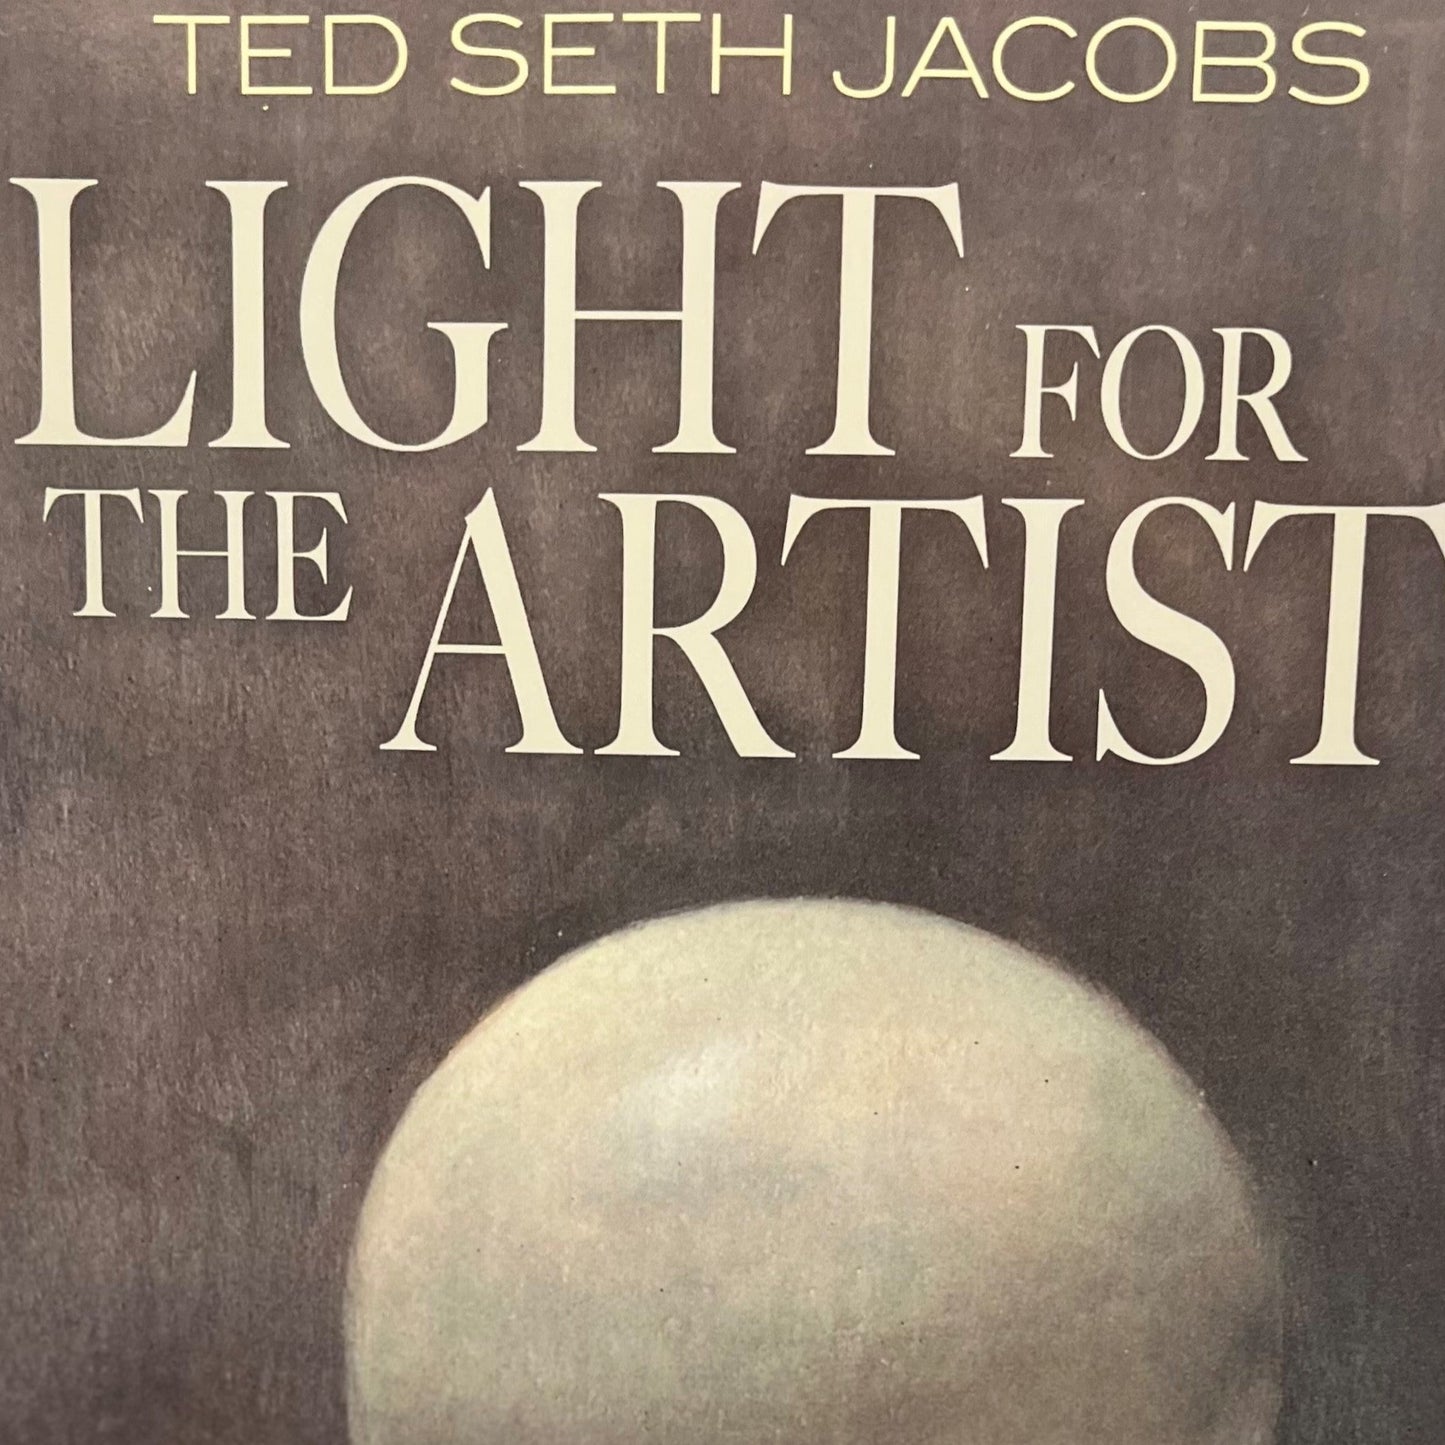 Jacobs, Ted Seth "Light for the Artist"